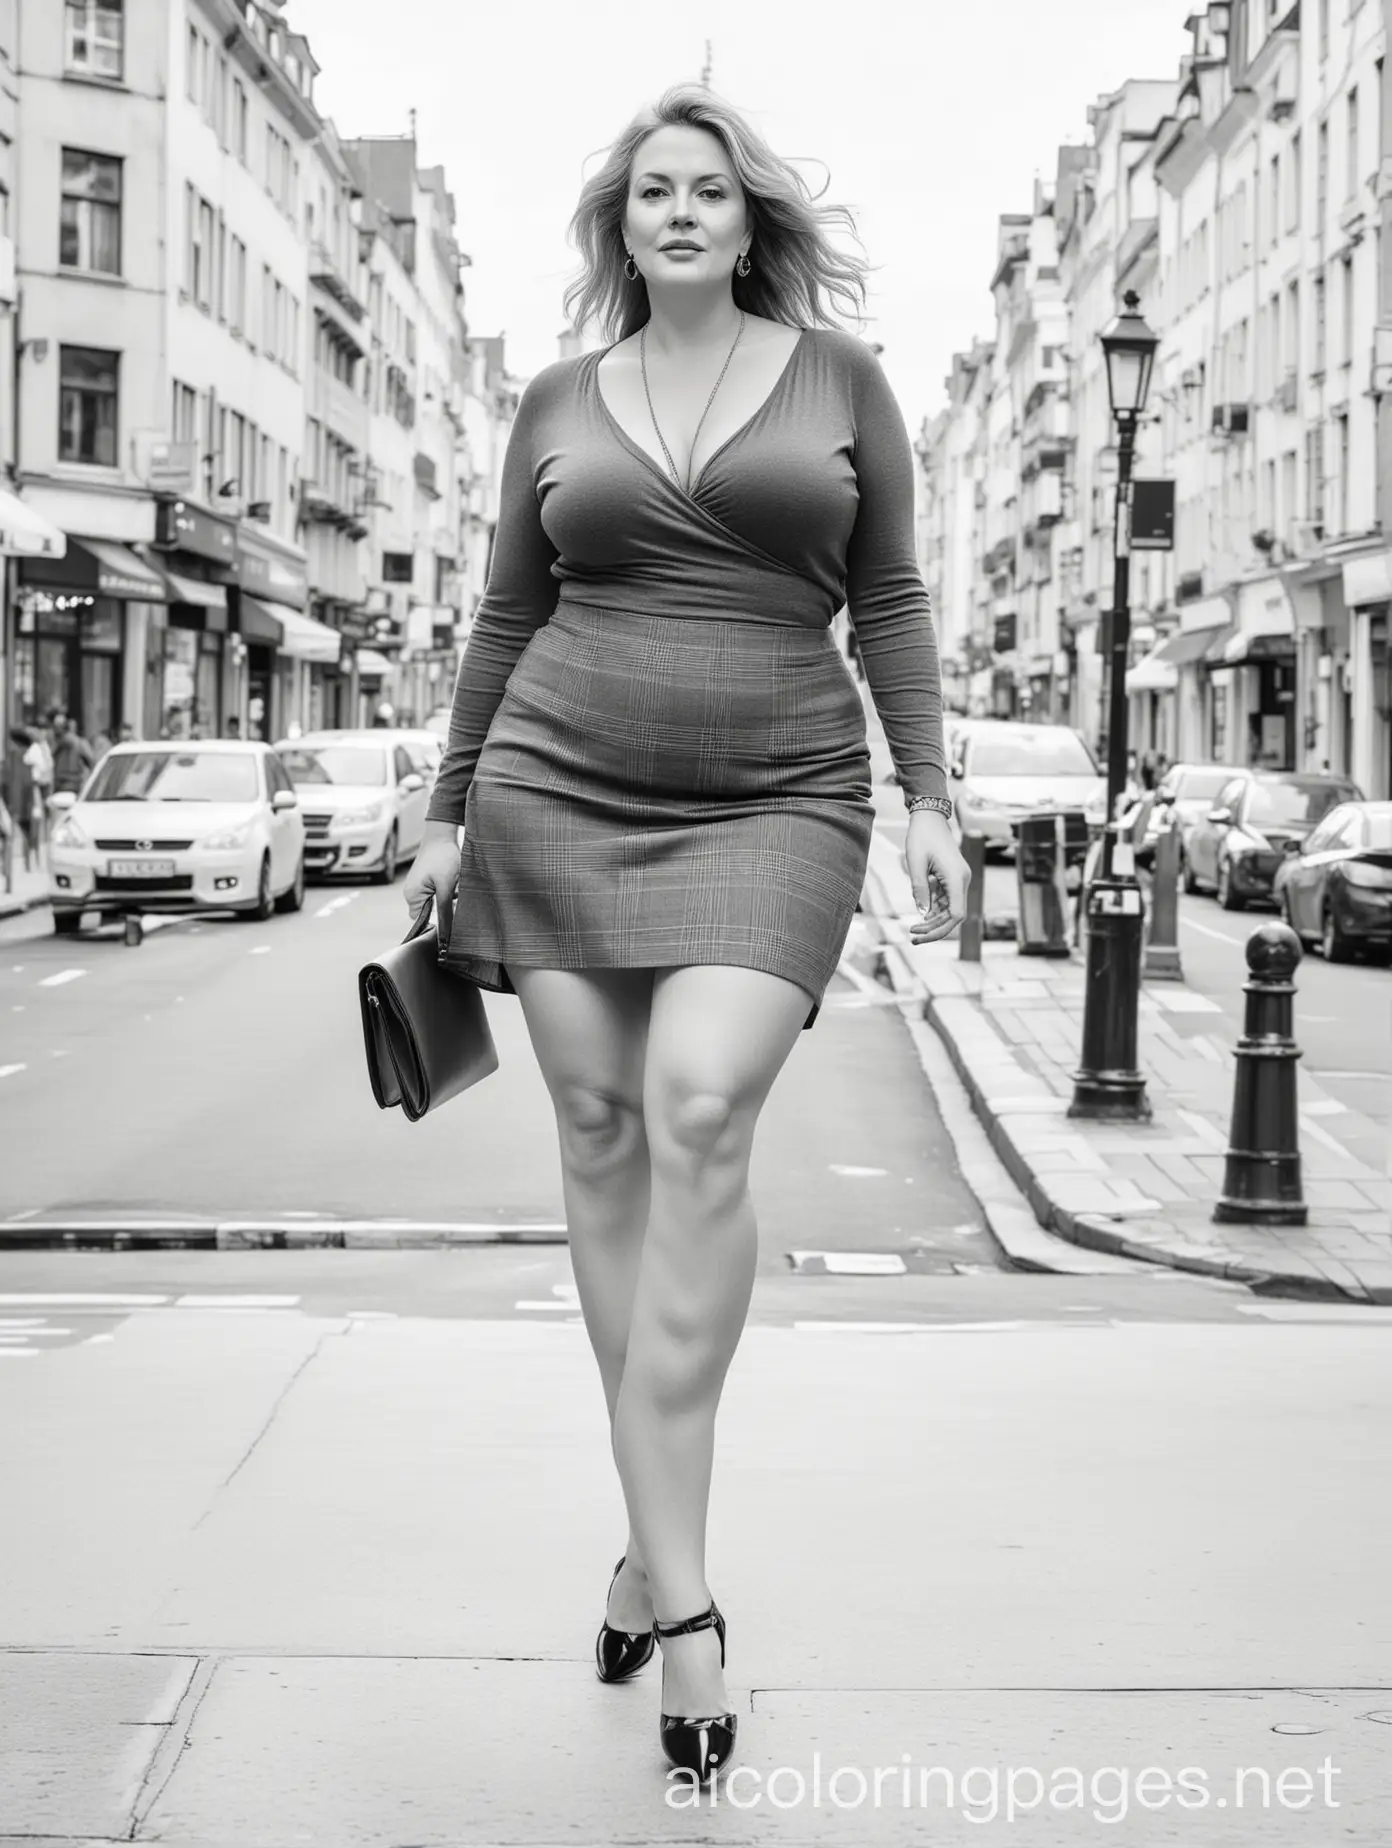 Curvy-Woman-in-Mini-Skirt-and-High-Heels-Walking-City-Streets-Coloring-Page-for-Adults